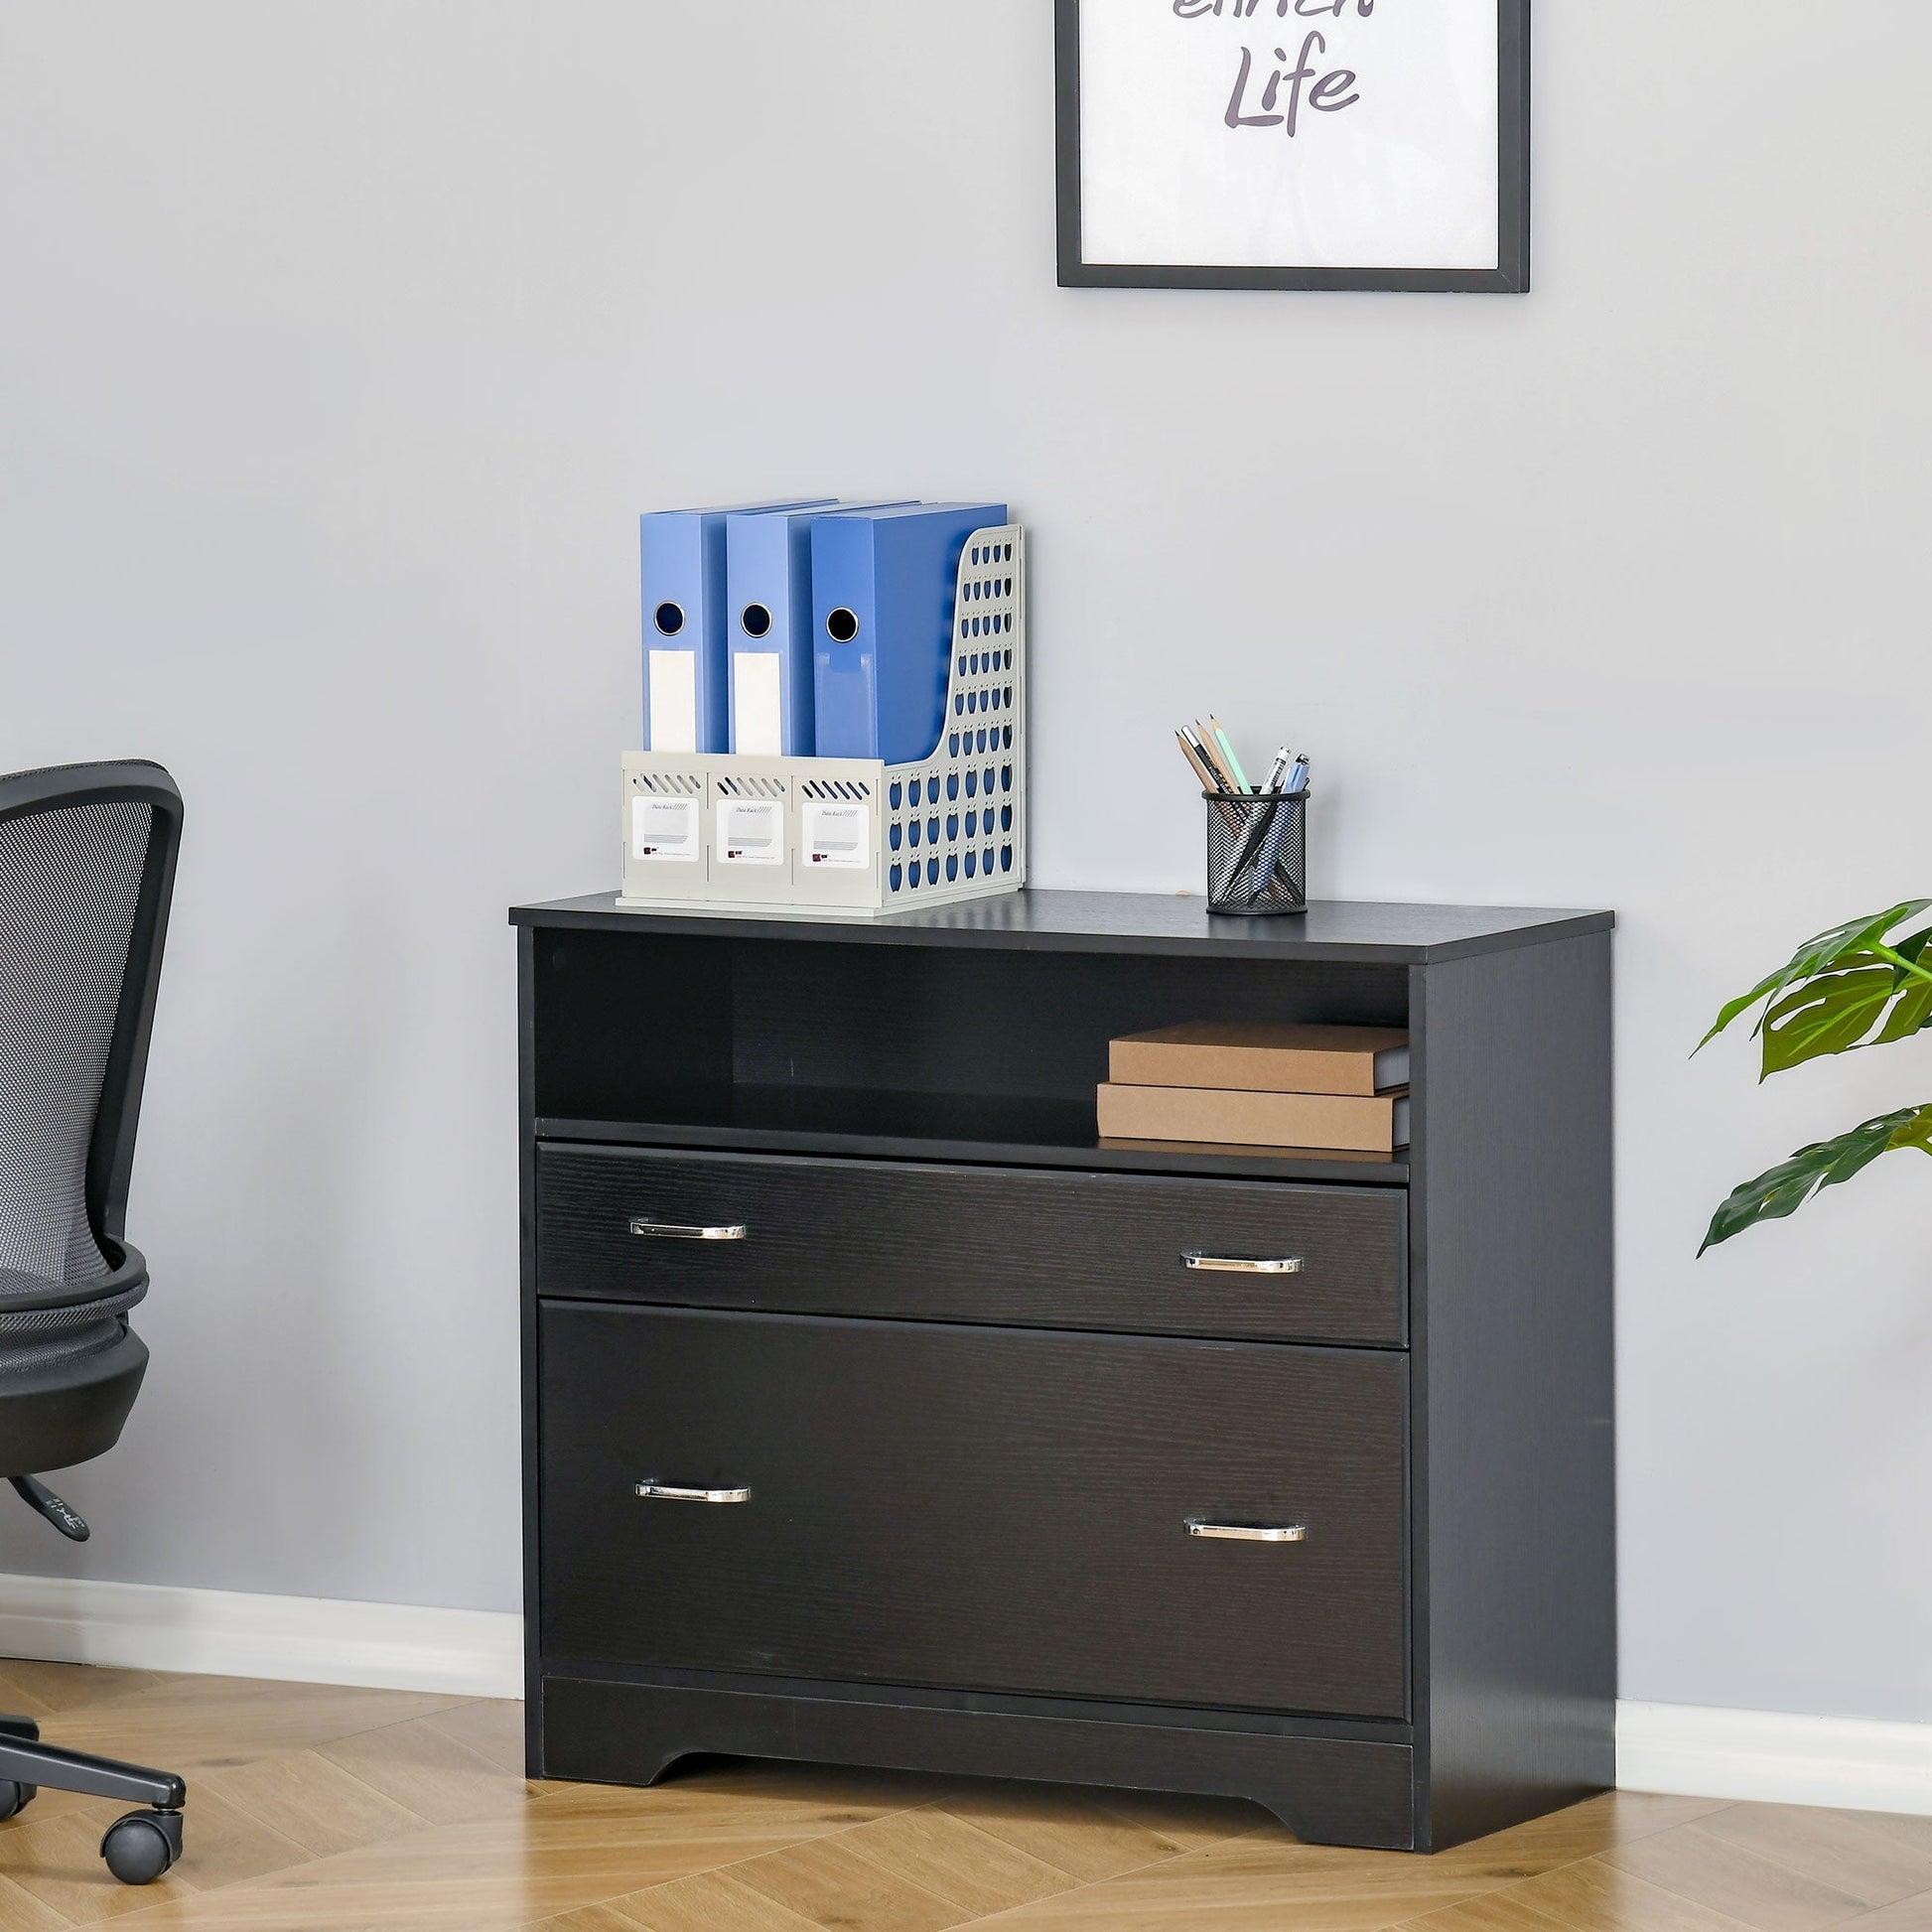 Lateral File Cabinet with 2 Drawers, Filing Cabinet for Hanging Letter Sized Files, Office Printer Stand, Black - Gallery Canada